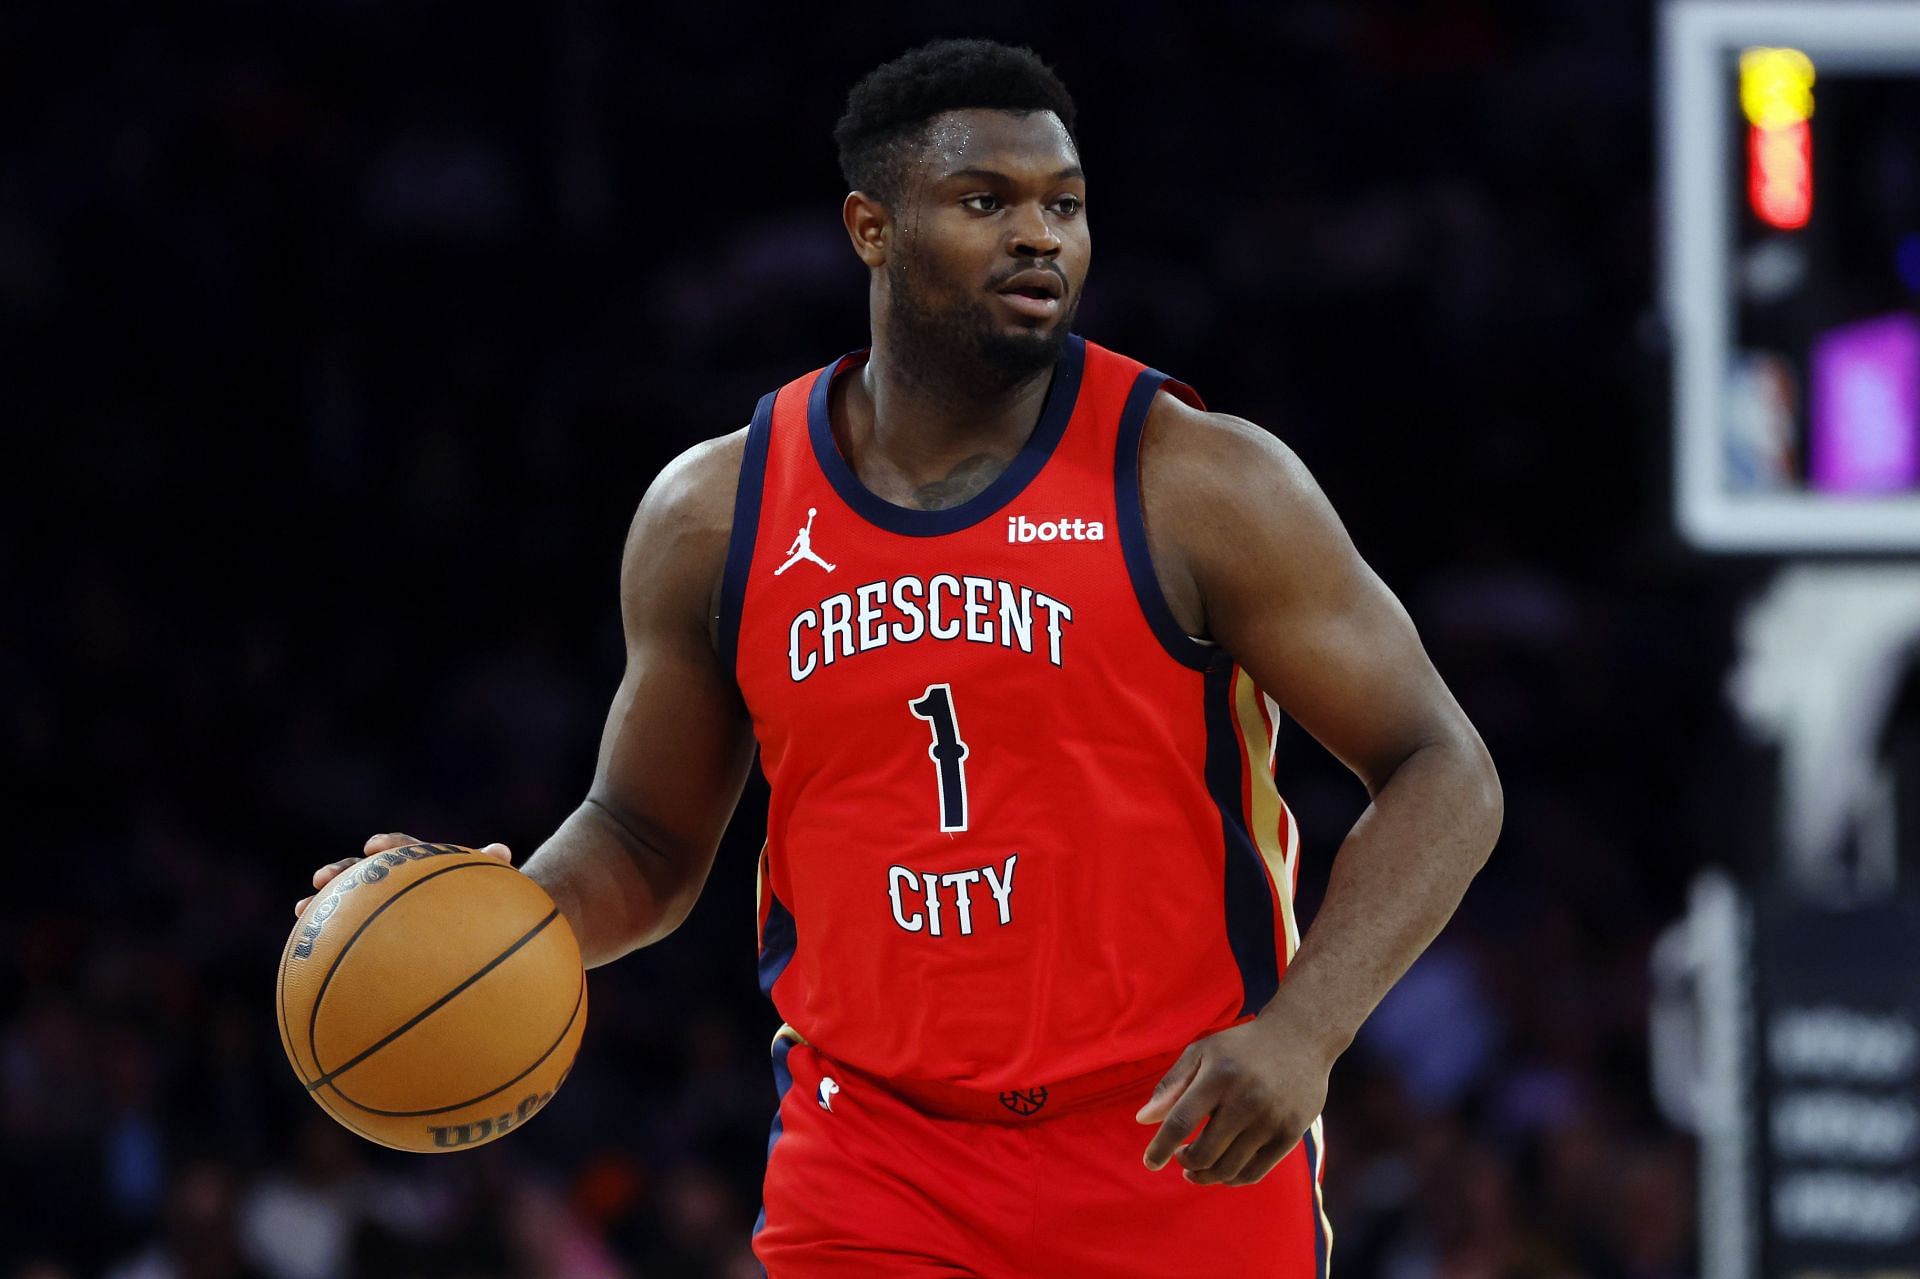 Zion Williamson led the Pelicans to a win against the Raptors.